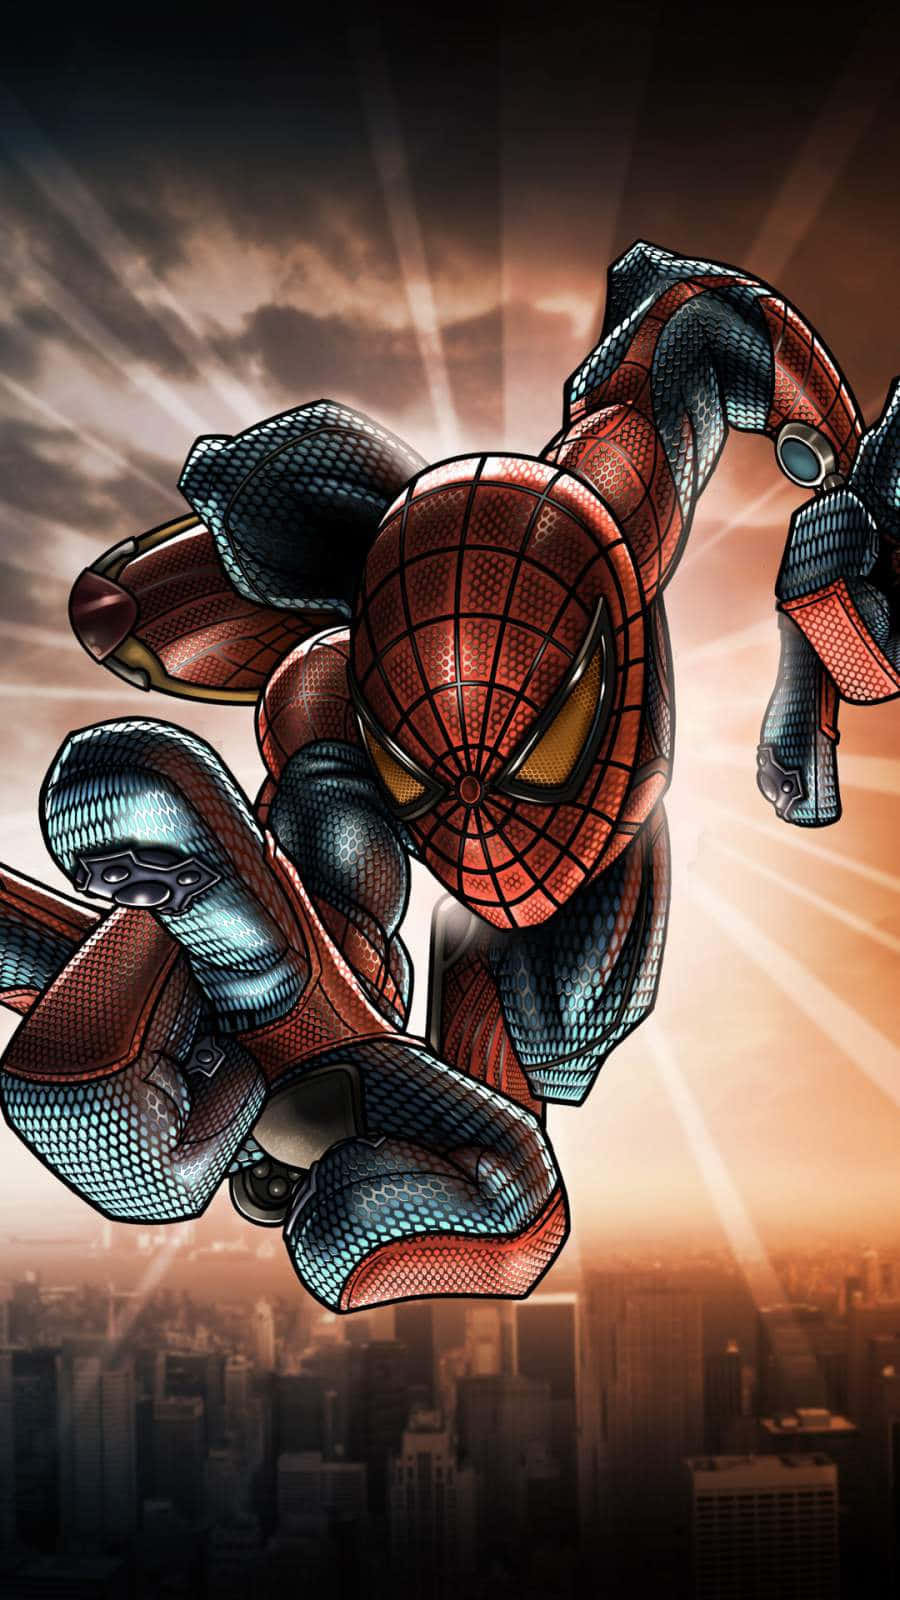 "Be Amazing with your new Spider-Man iPhone!" Wallpaper